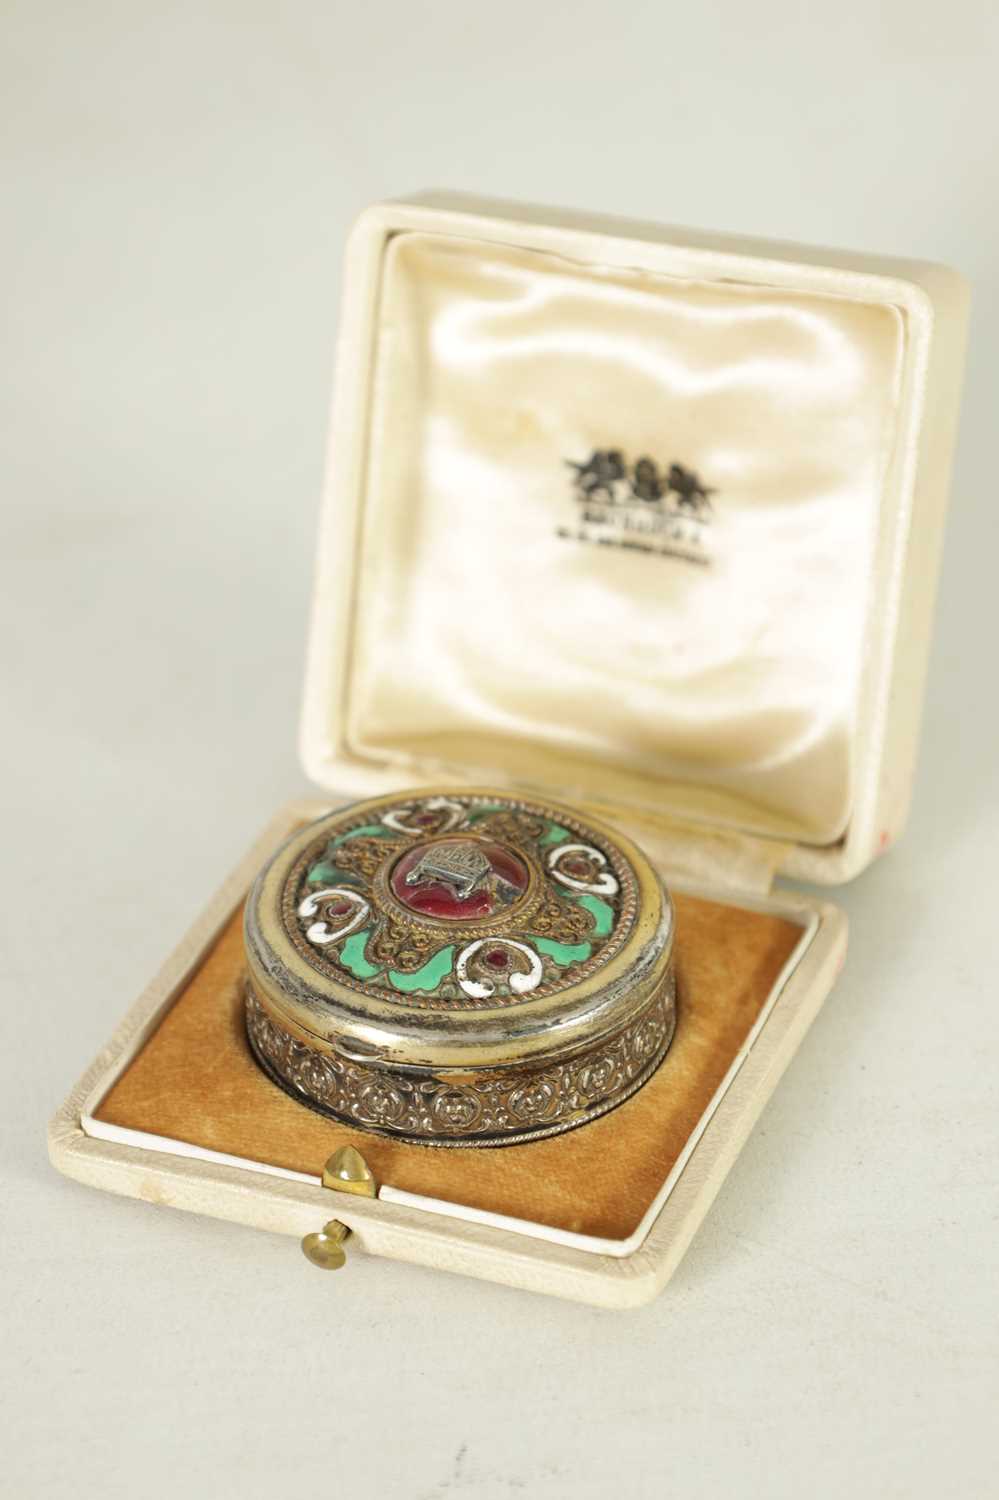 A LATE 19TH-CENTURY RUSSIAN HALLMARKED SILVER GILT AND ENAMEL PILL BOX - Image 2 of 10